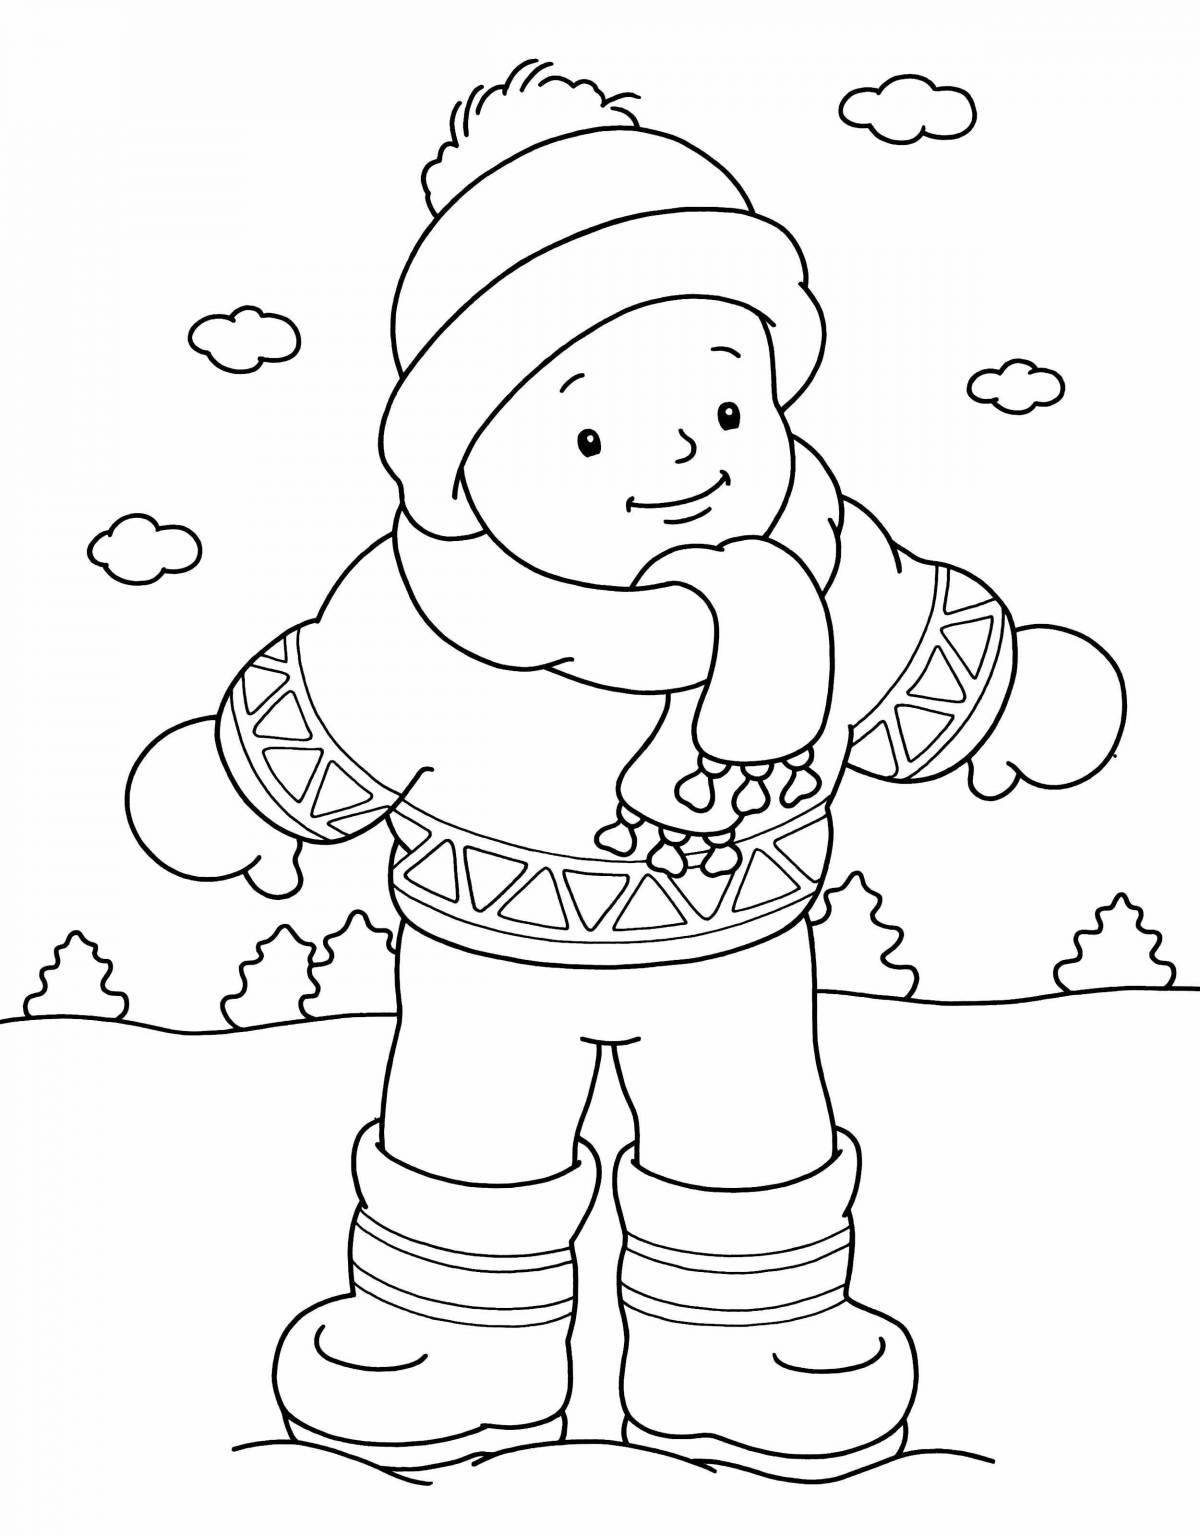 Snuggly coloring page children's winter clothes